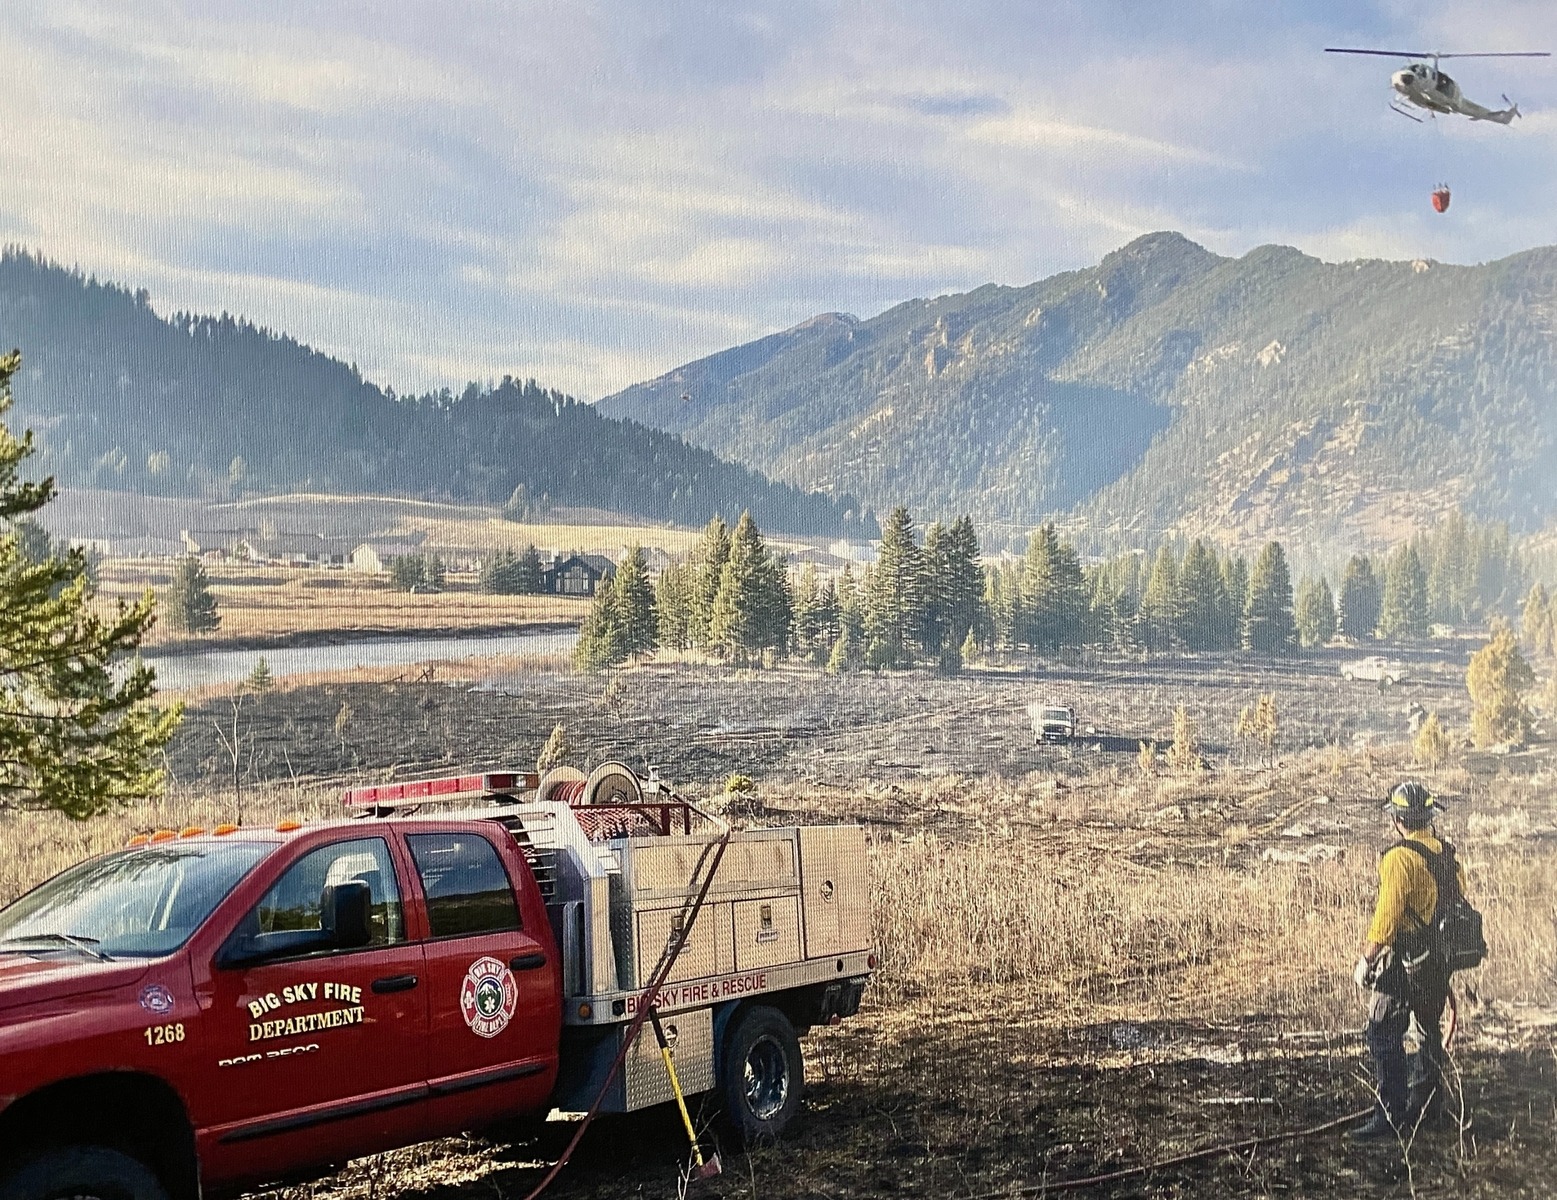 This photo of the Porcupine Fire in 2021 hangs in the halls of the Big Sky Fire Department. Helicopters pulled water from the Gallatin River beyond the burn zone. Photo courtesy BSFD